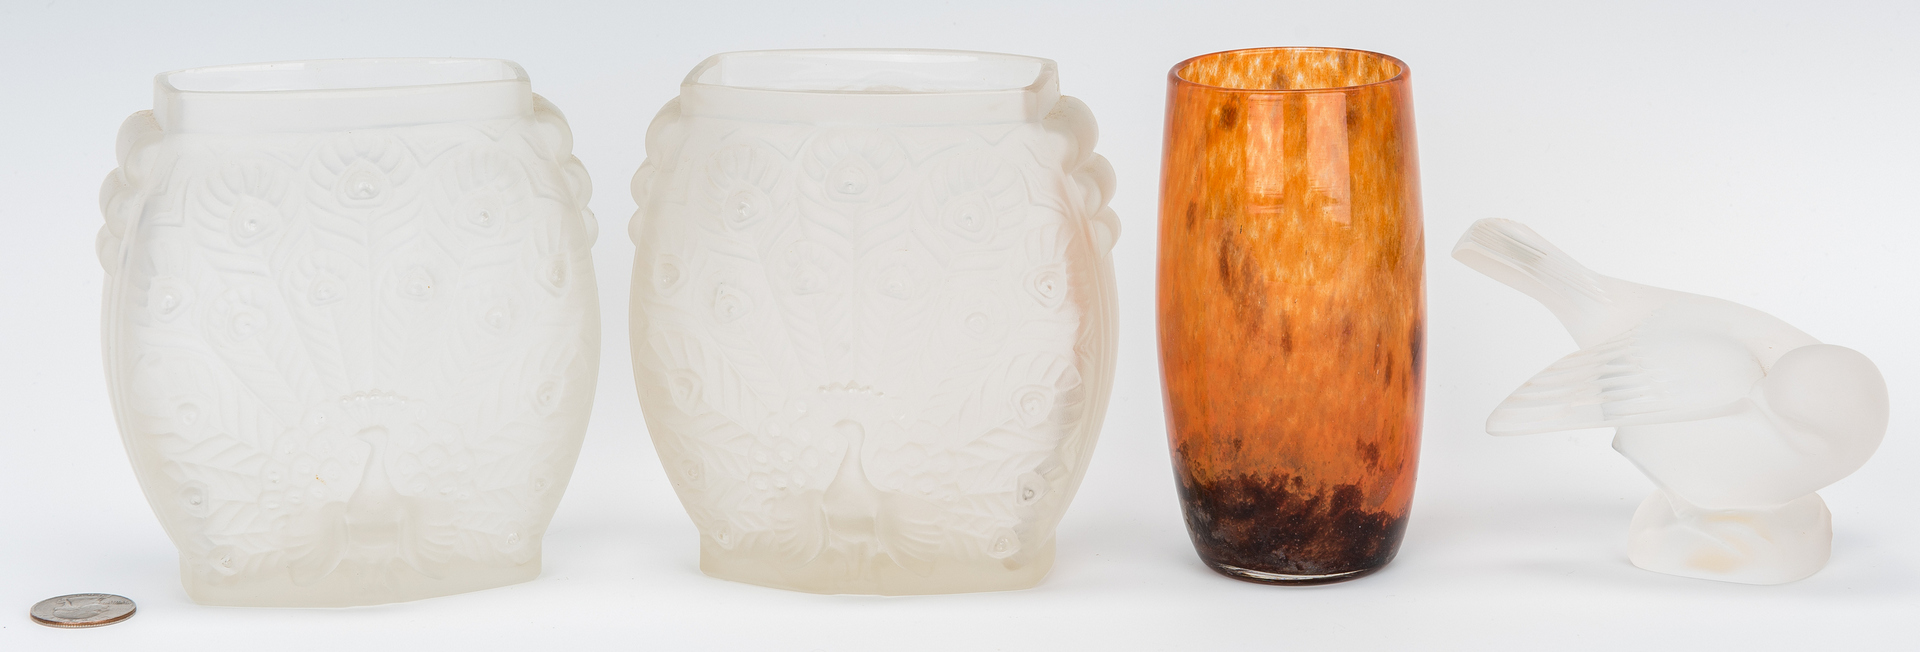 Lot 975: Daum Art Glass Vase & 3 Frosted Glass Items, 4 items